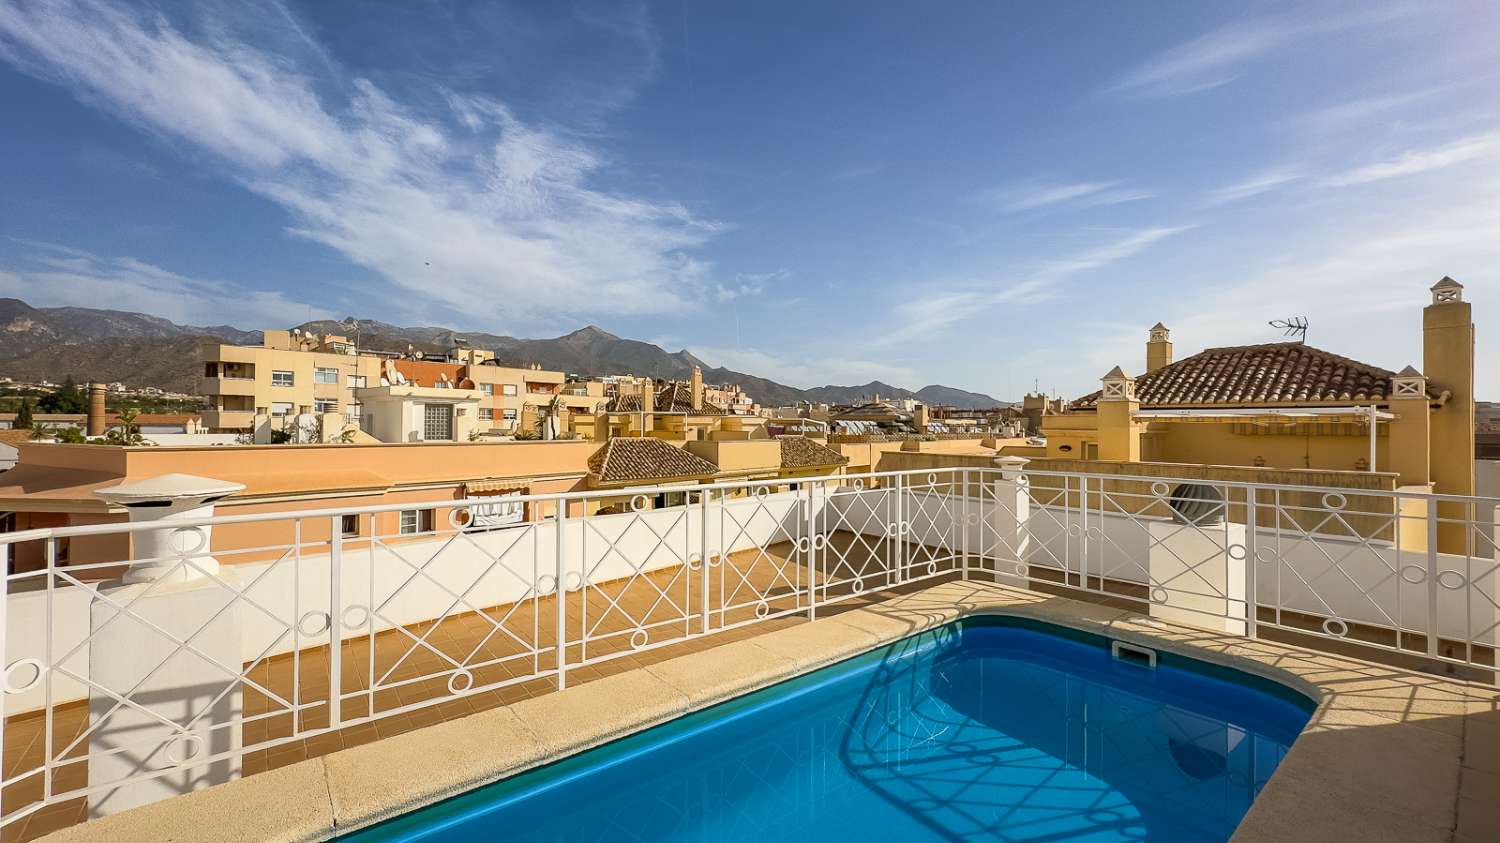 Central location, roof terrace and pool!